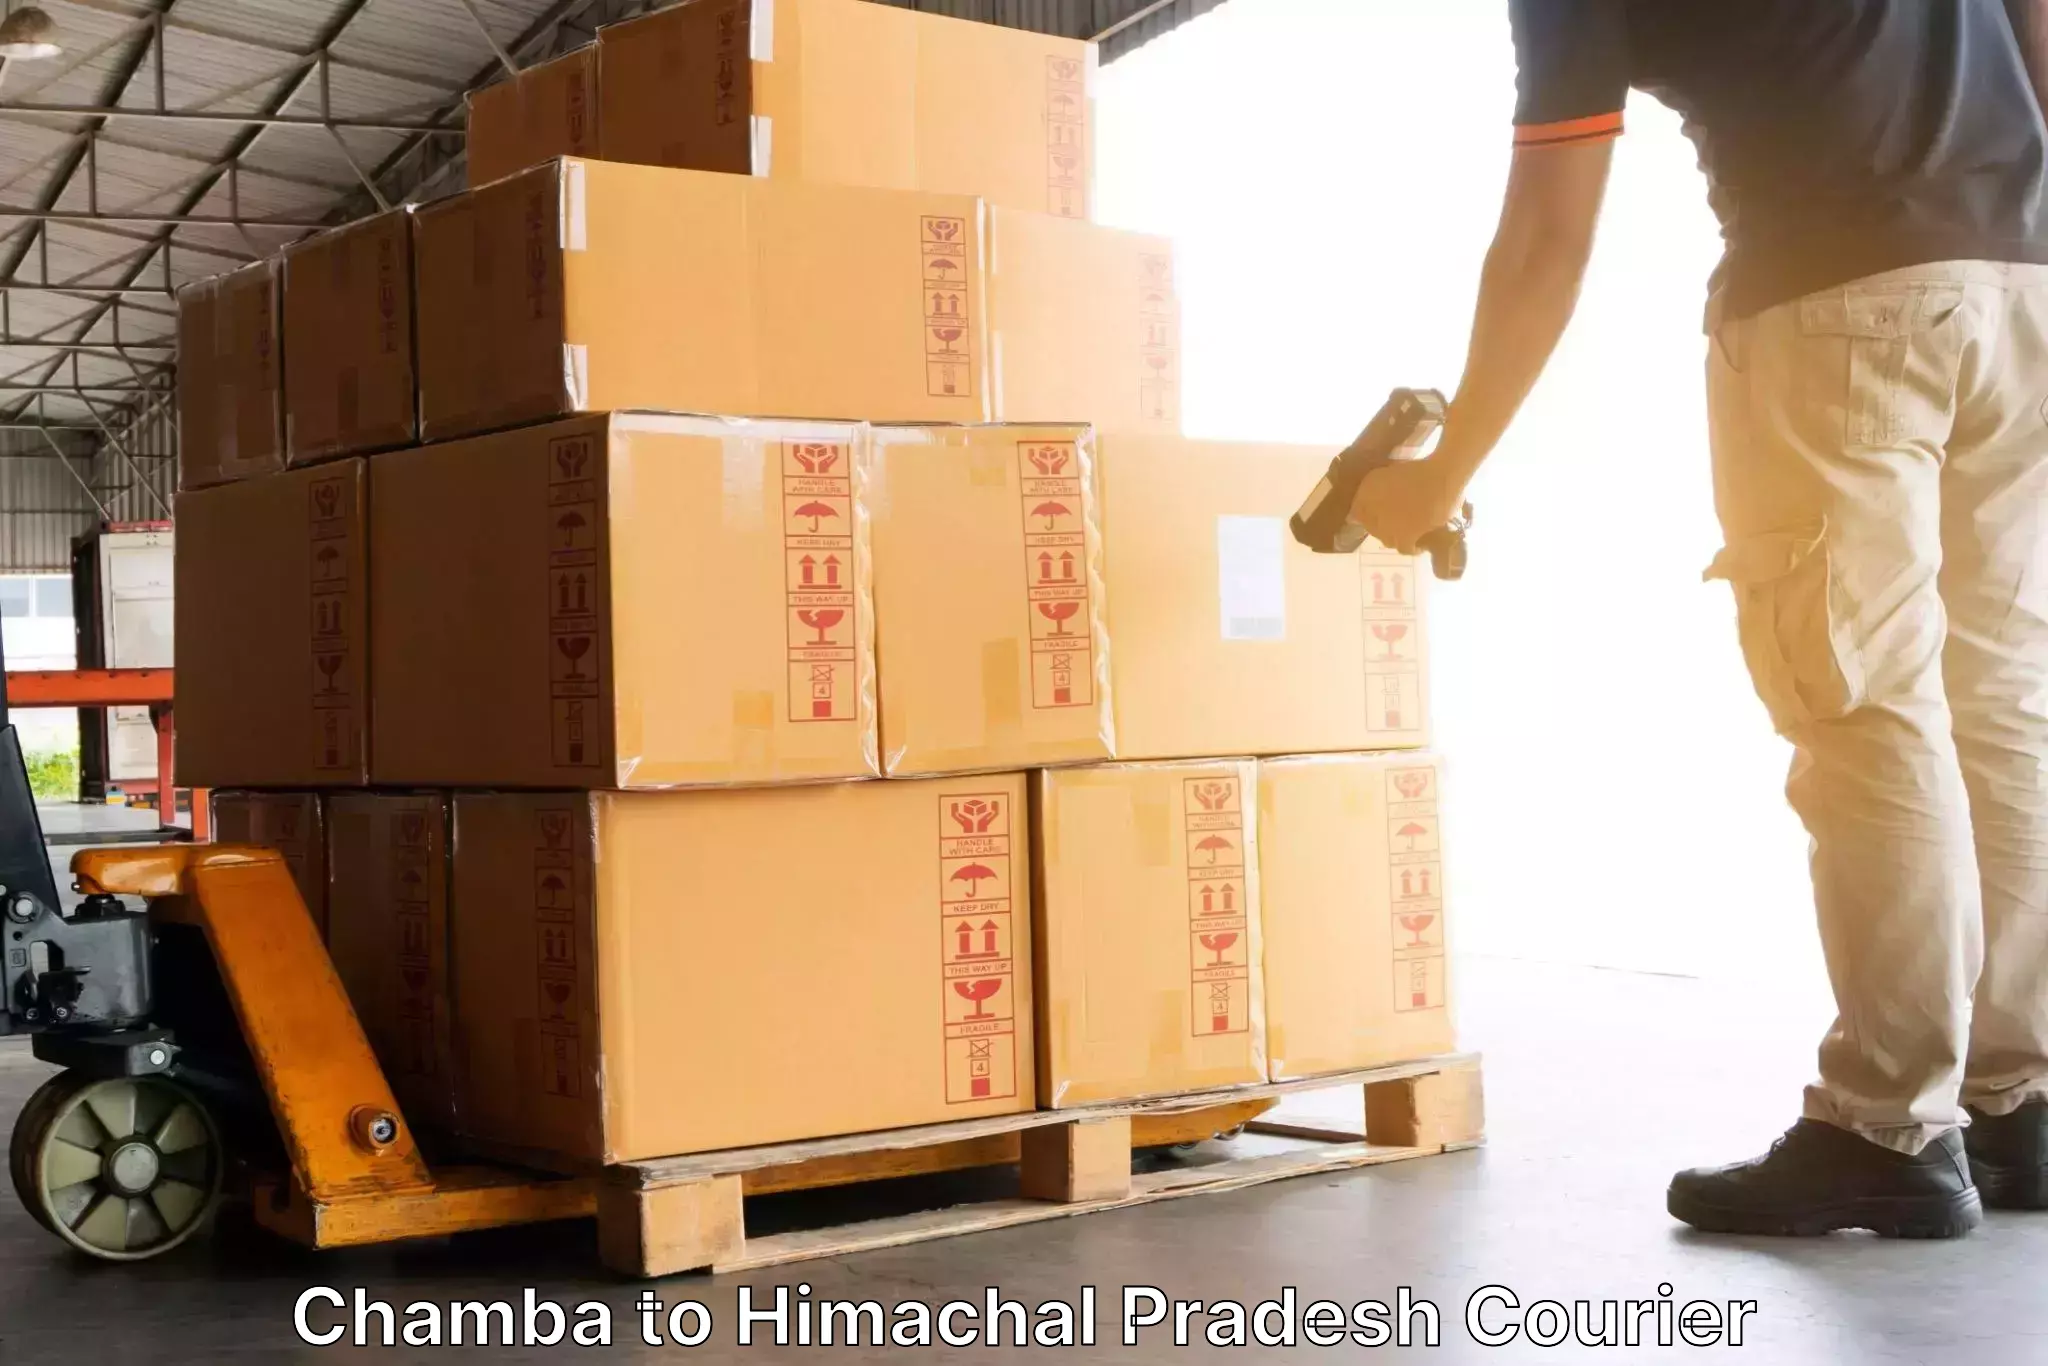 Efficient freight service in Chamba to Rehan